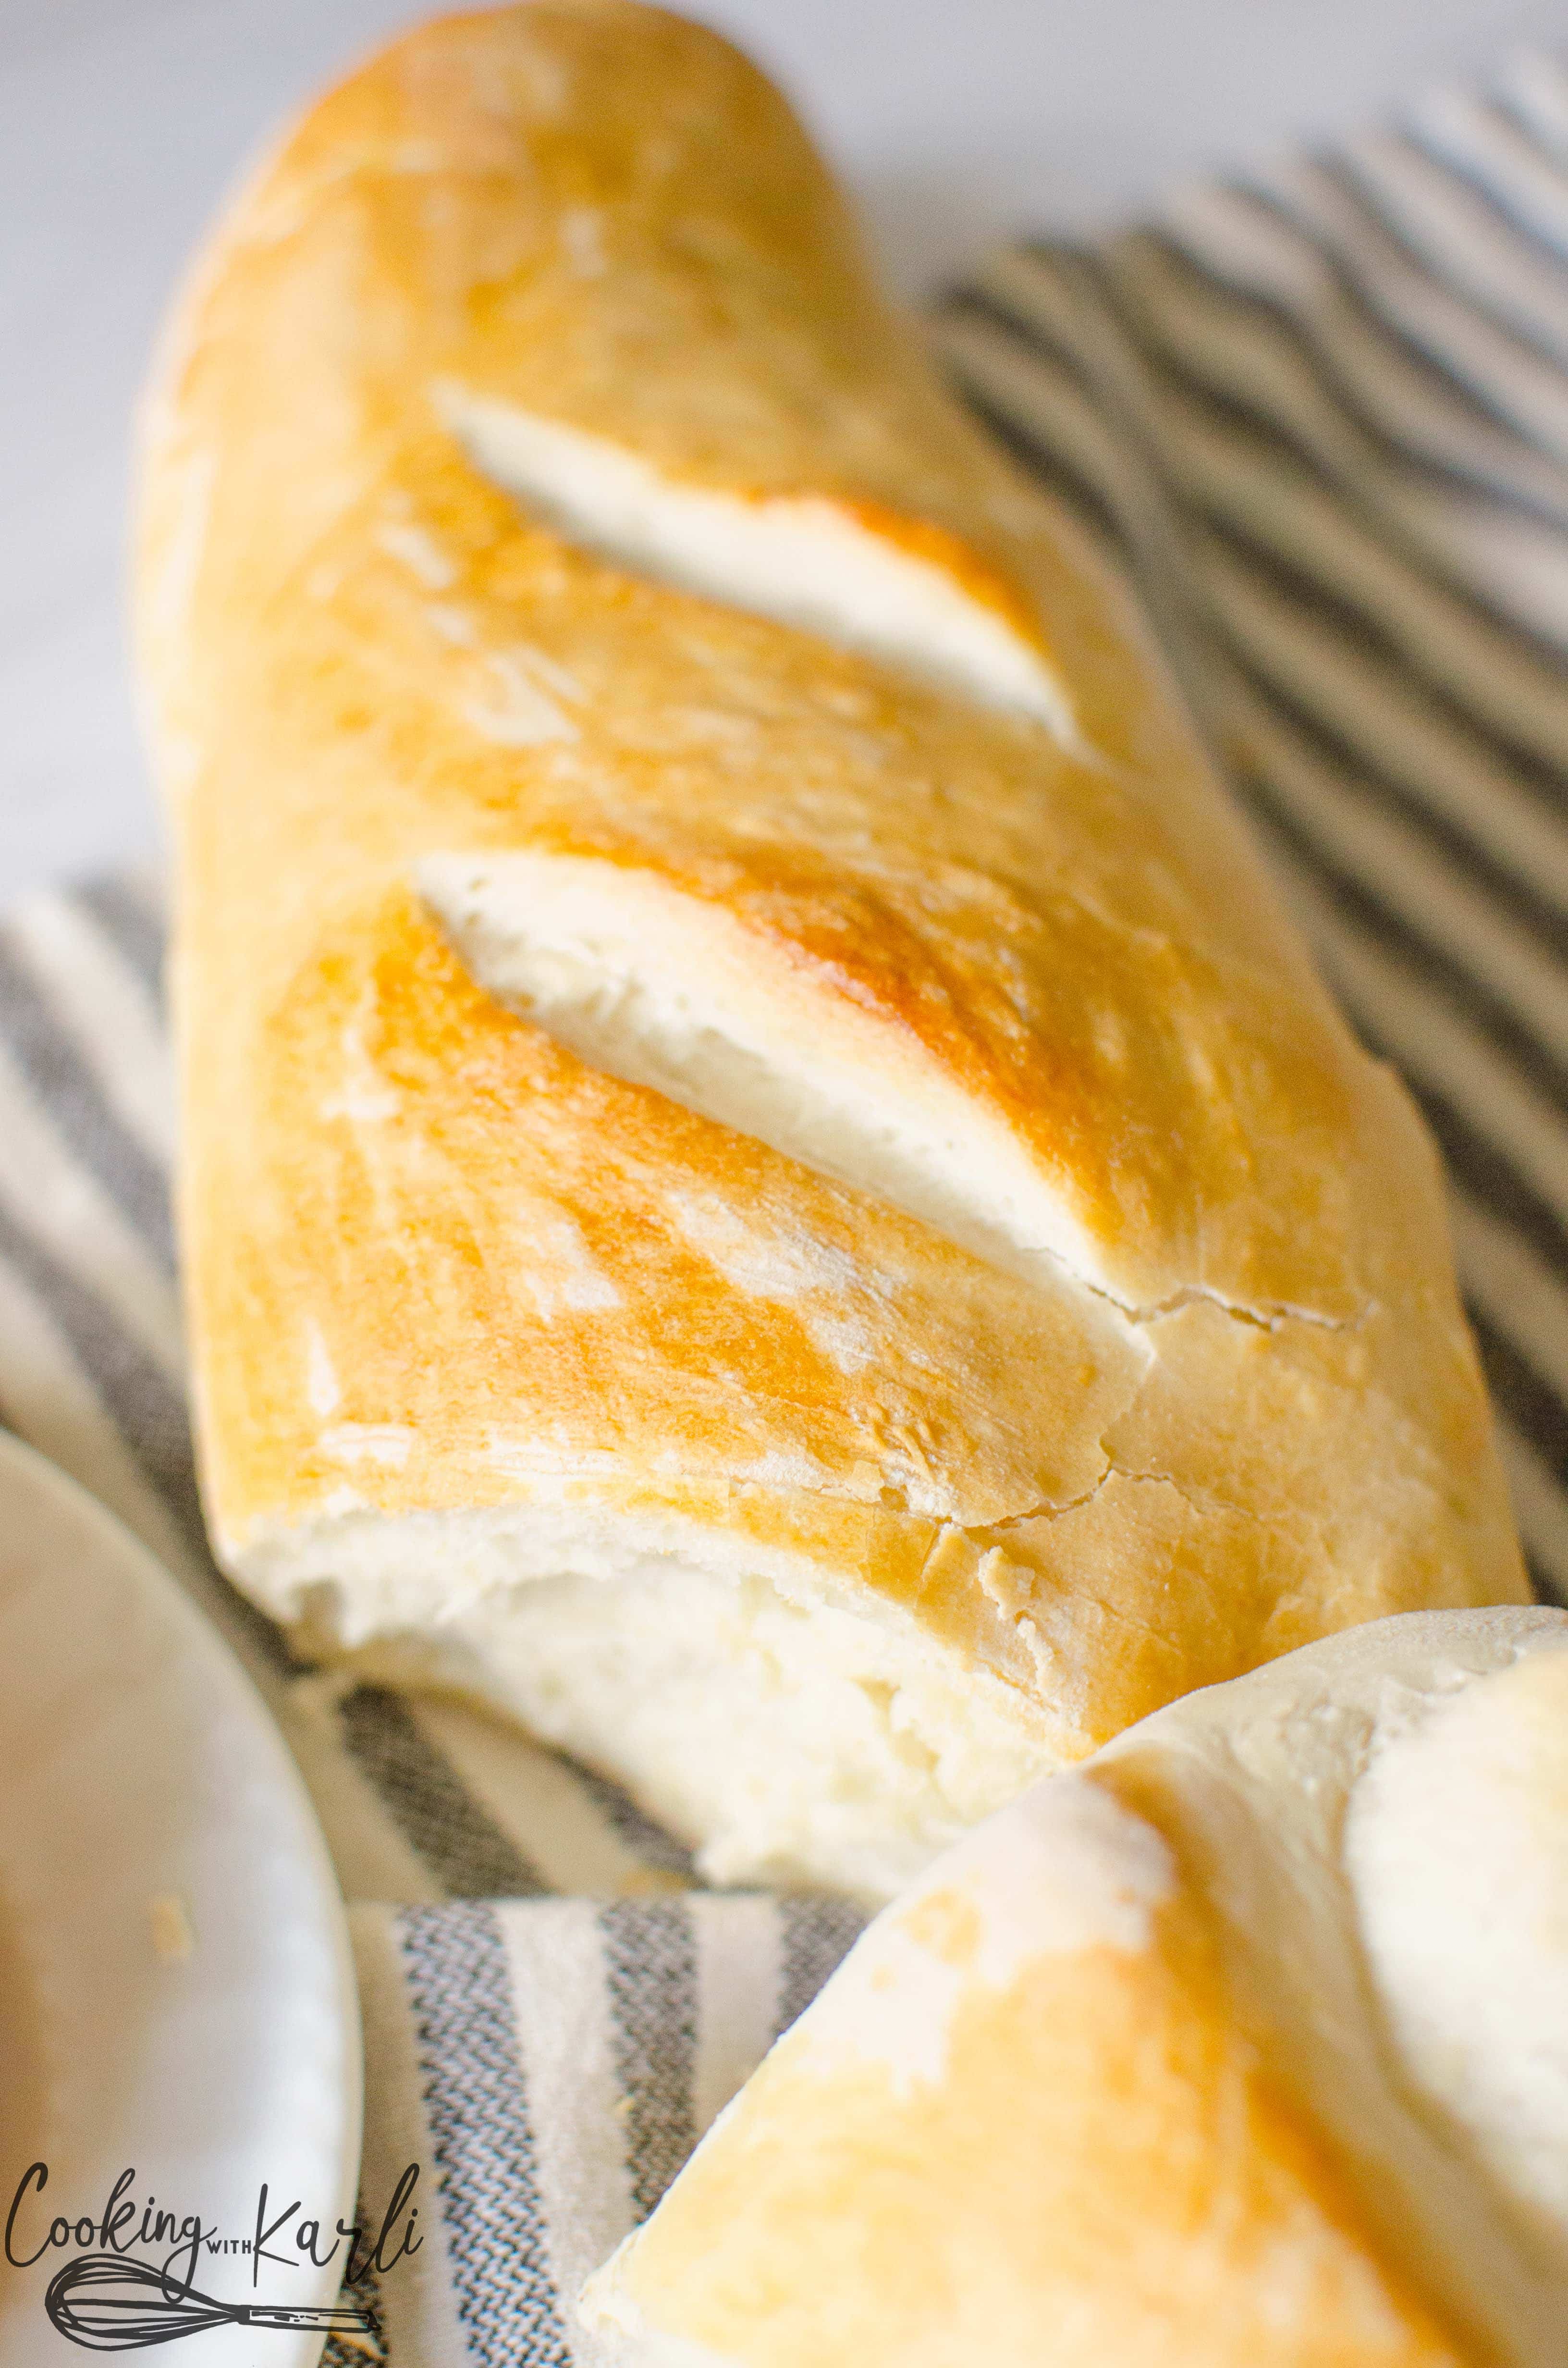 With a thick, chewy crust and a fluffy tender inside, this french bread recipe is a keeper.